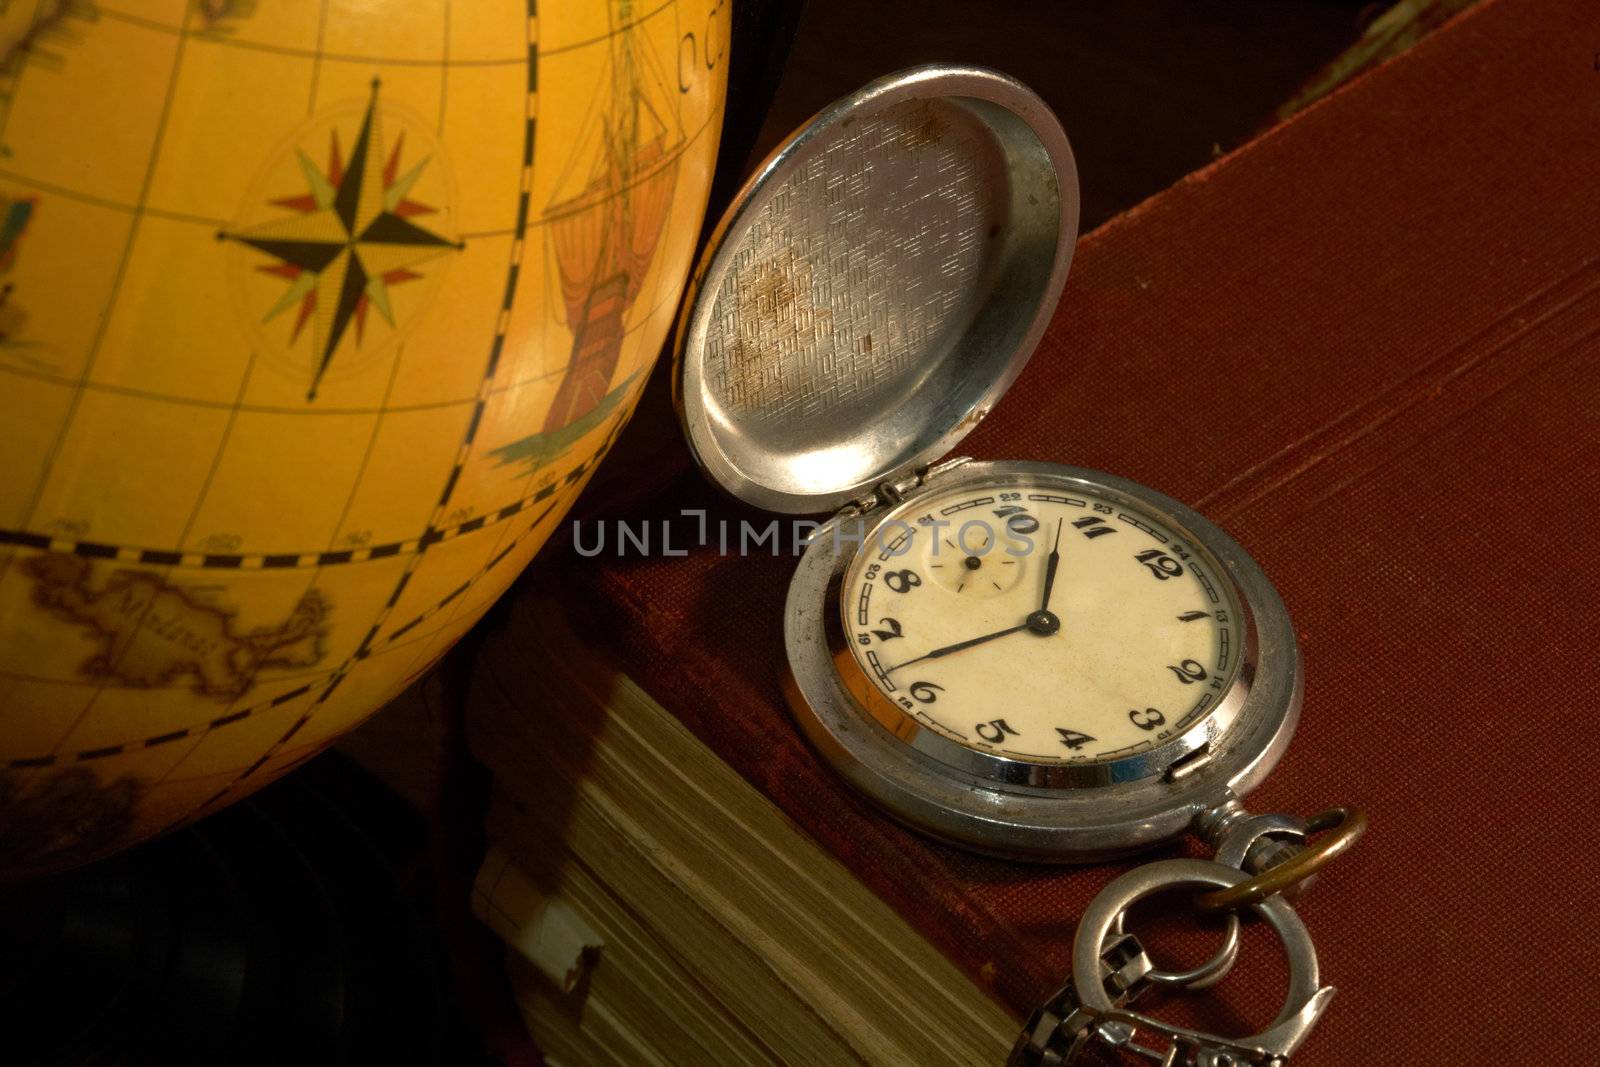 Ancient map and watch by petrkurgan